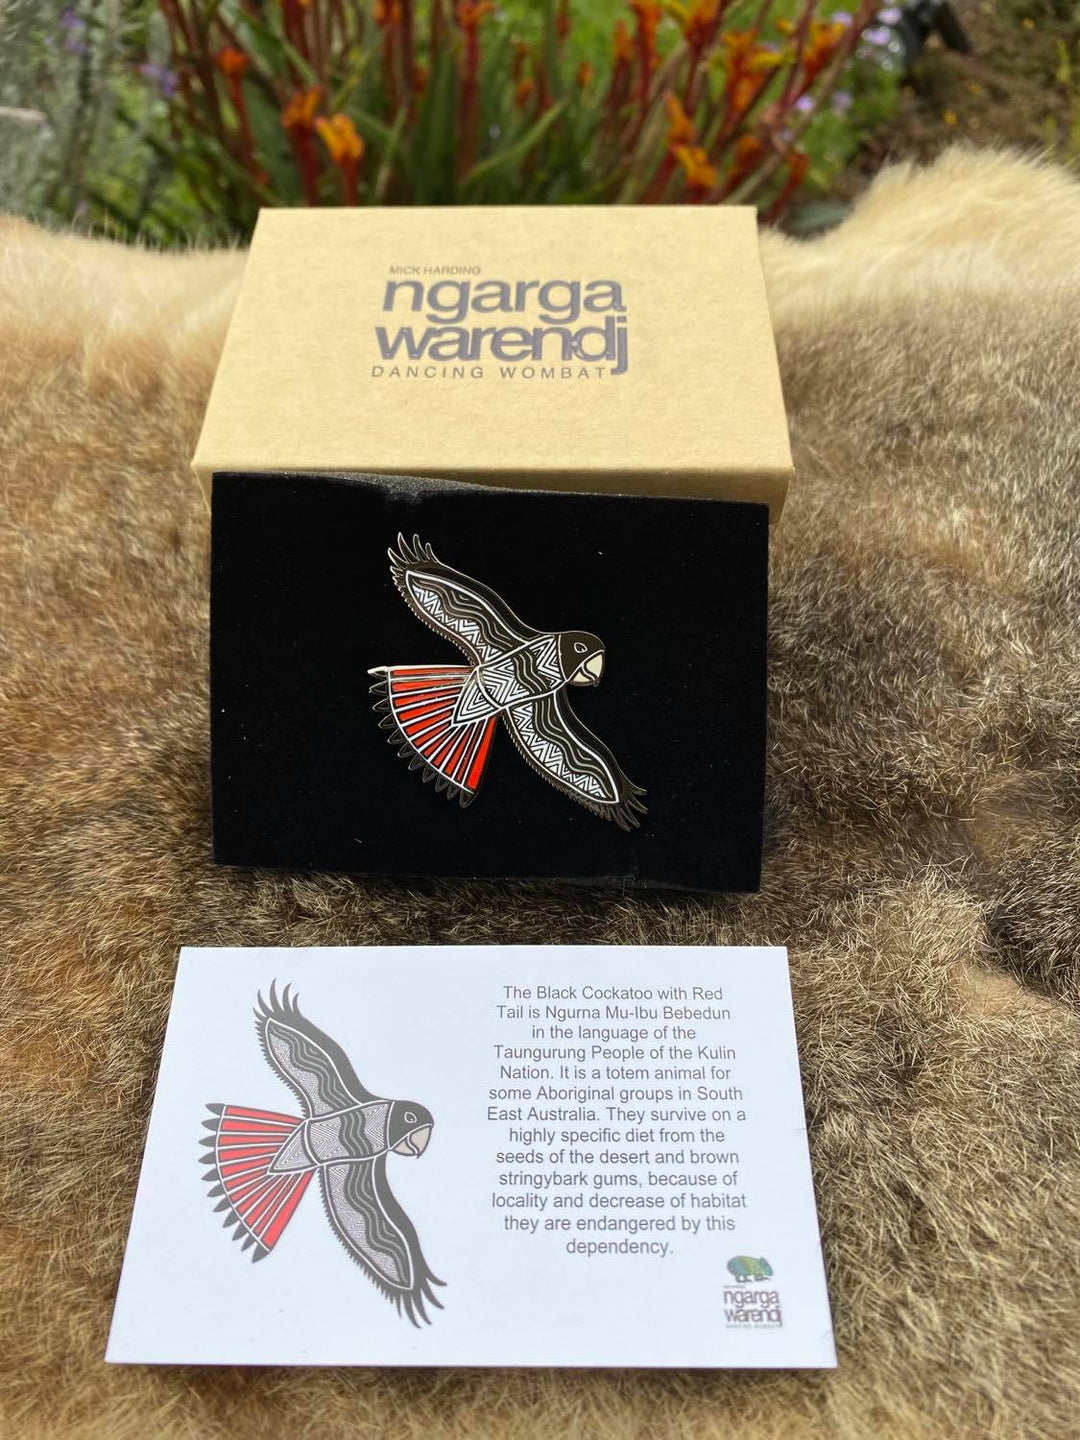 Add a finishing touch to any outfit, with this Lapel Pin featuring our Red Tailed Black Cockatoo design by Ngarga Warendj Dancing Wombat.